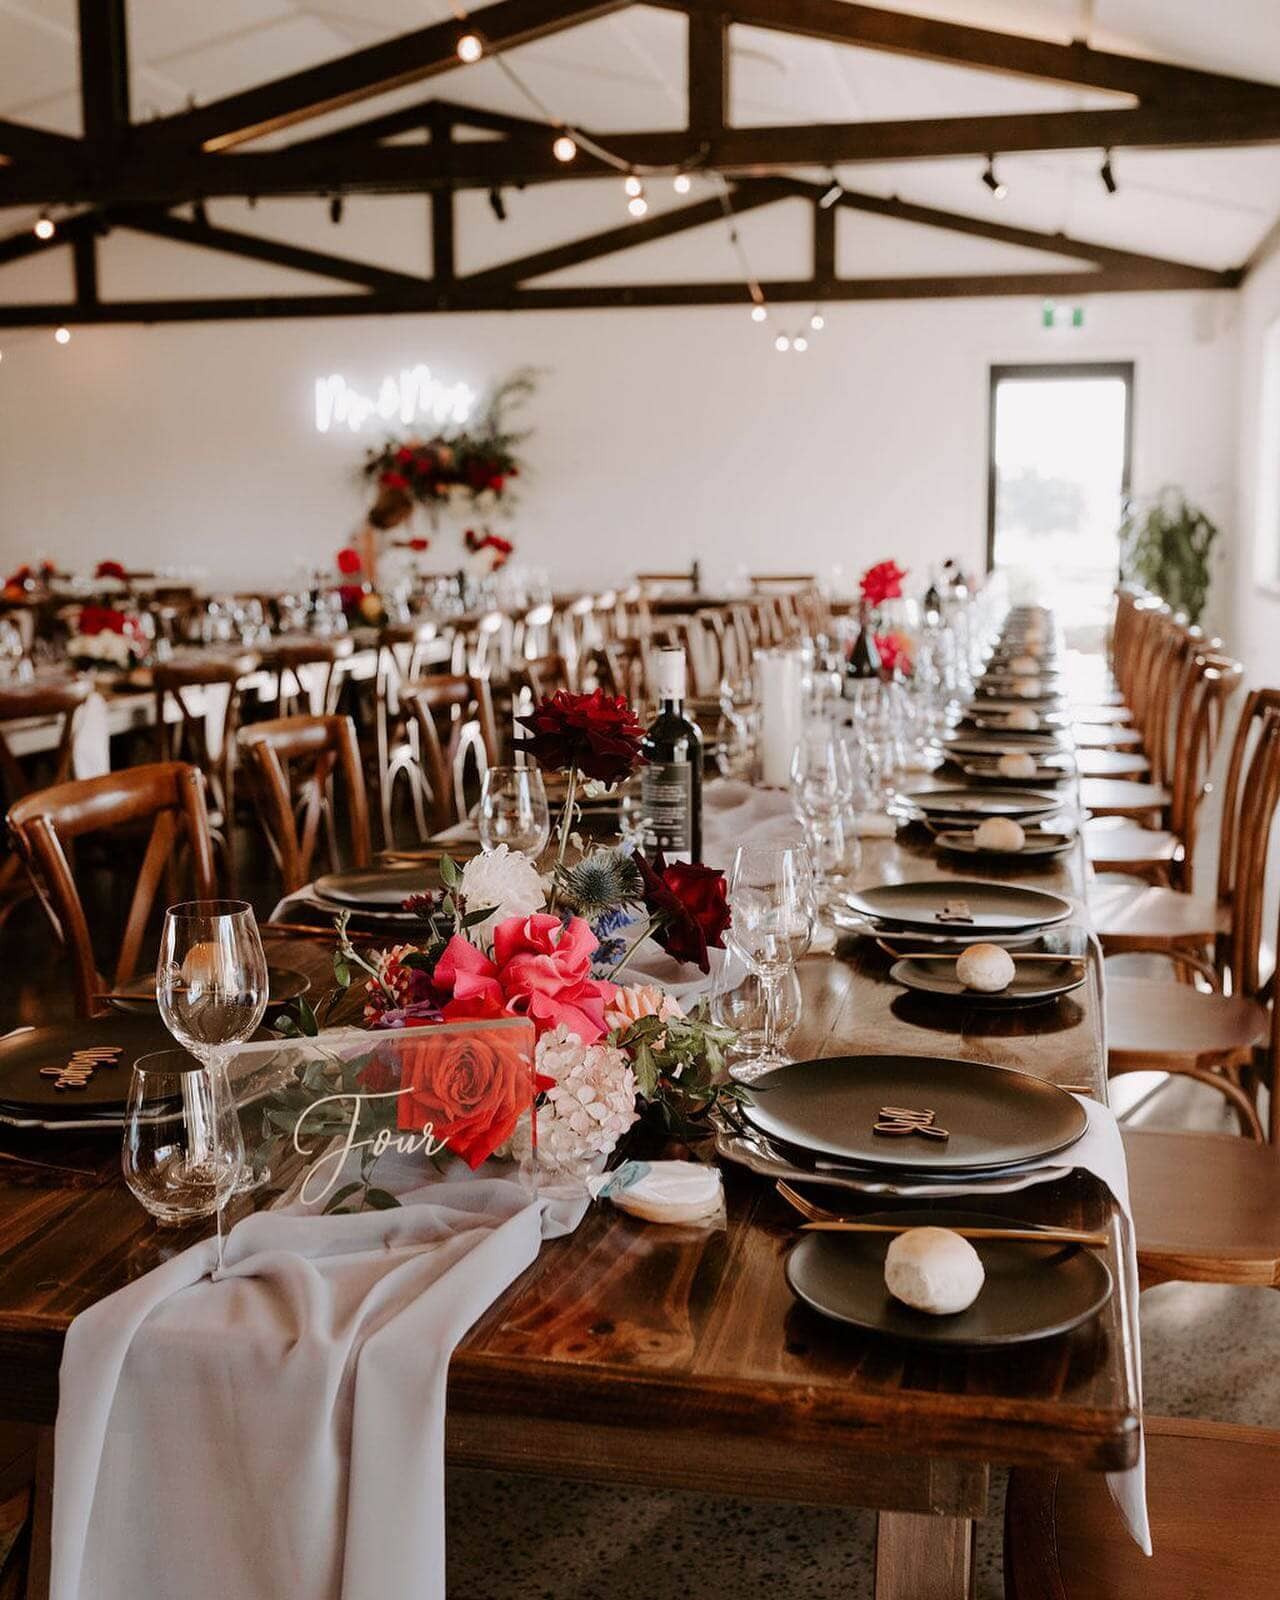 Best-rustic-country-wedding-venues-in-australia-BoxGrove-NSW-photo-Gillian-Keough-Photography